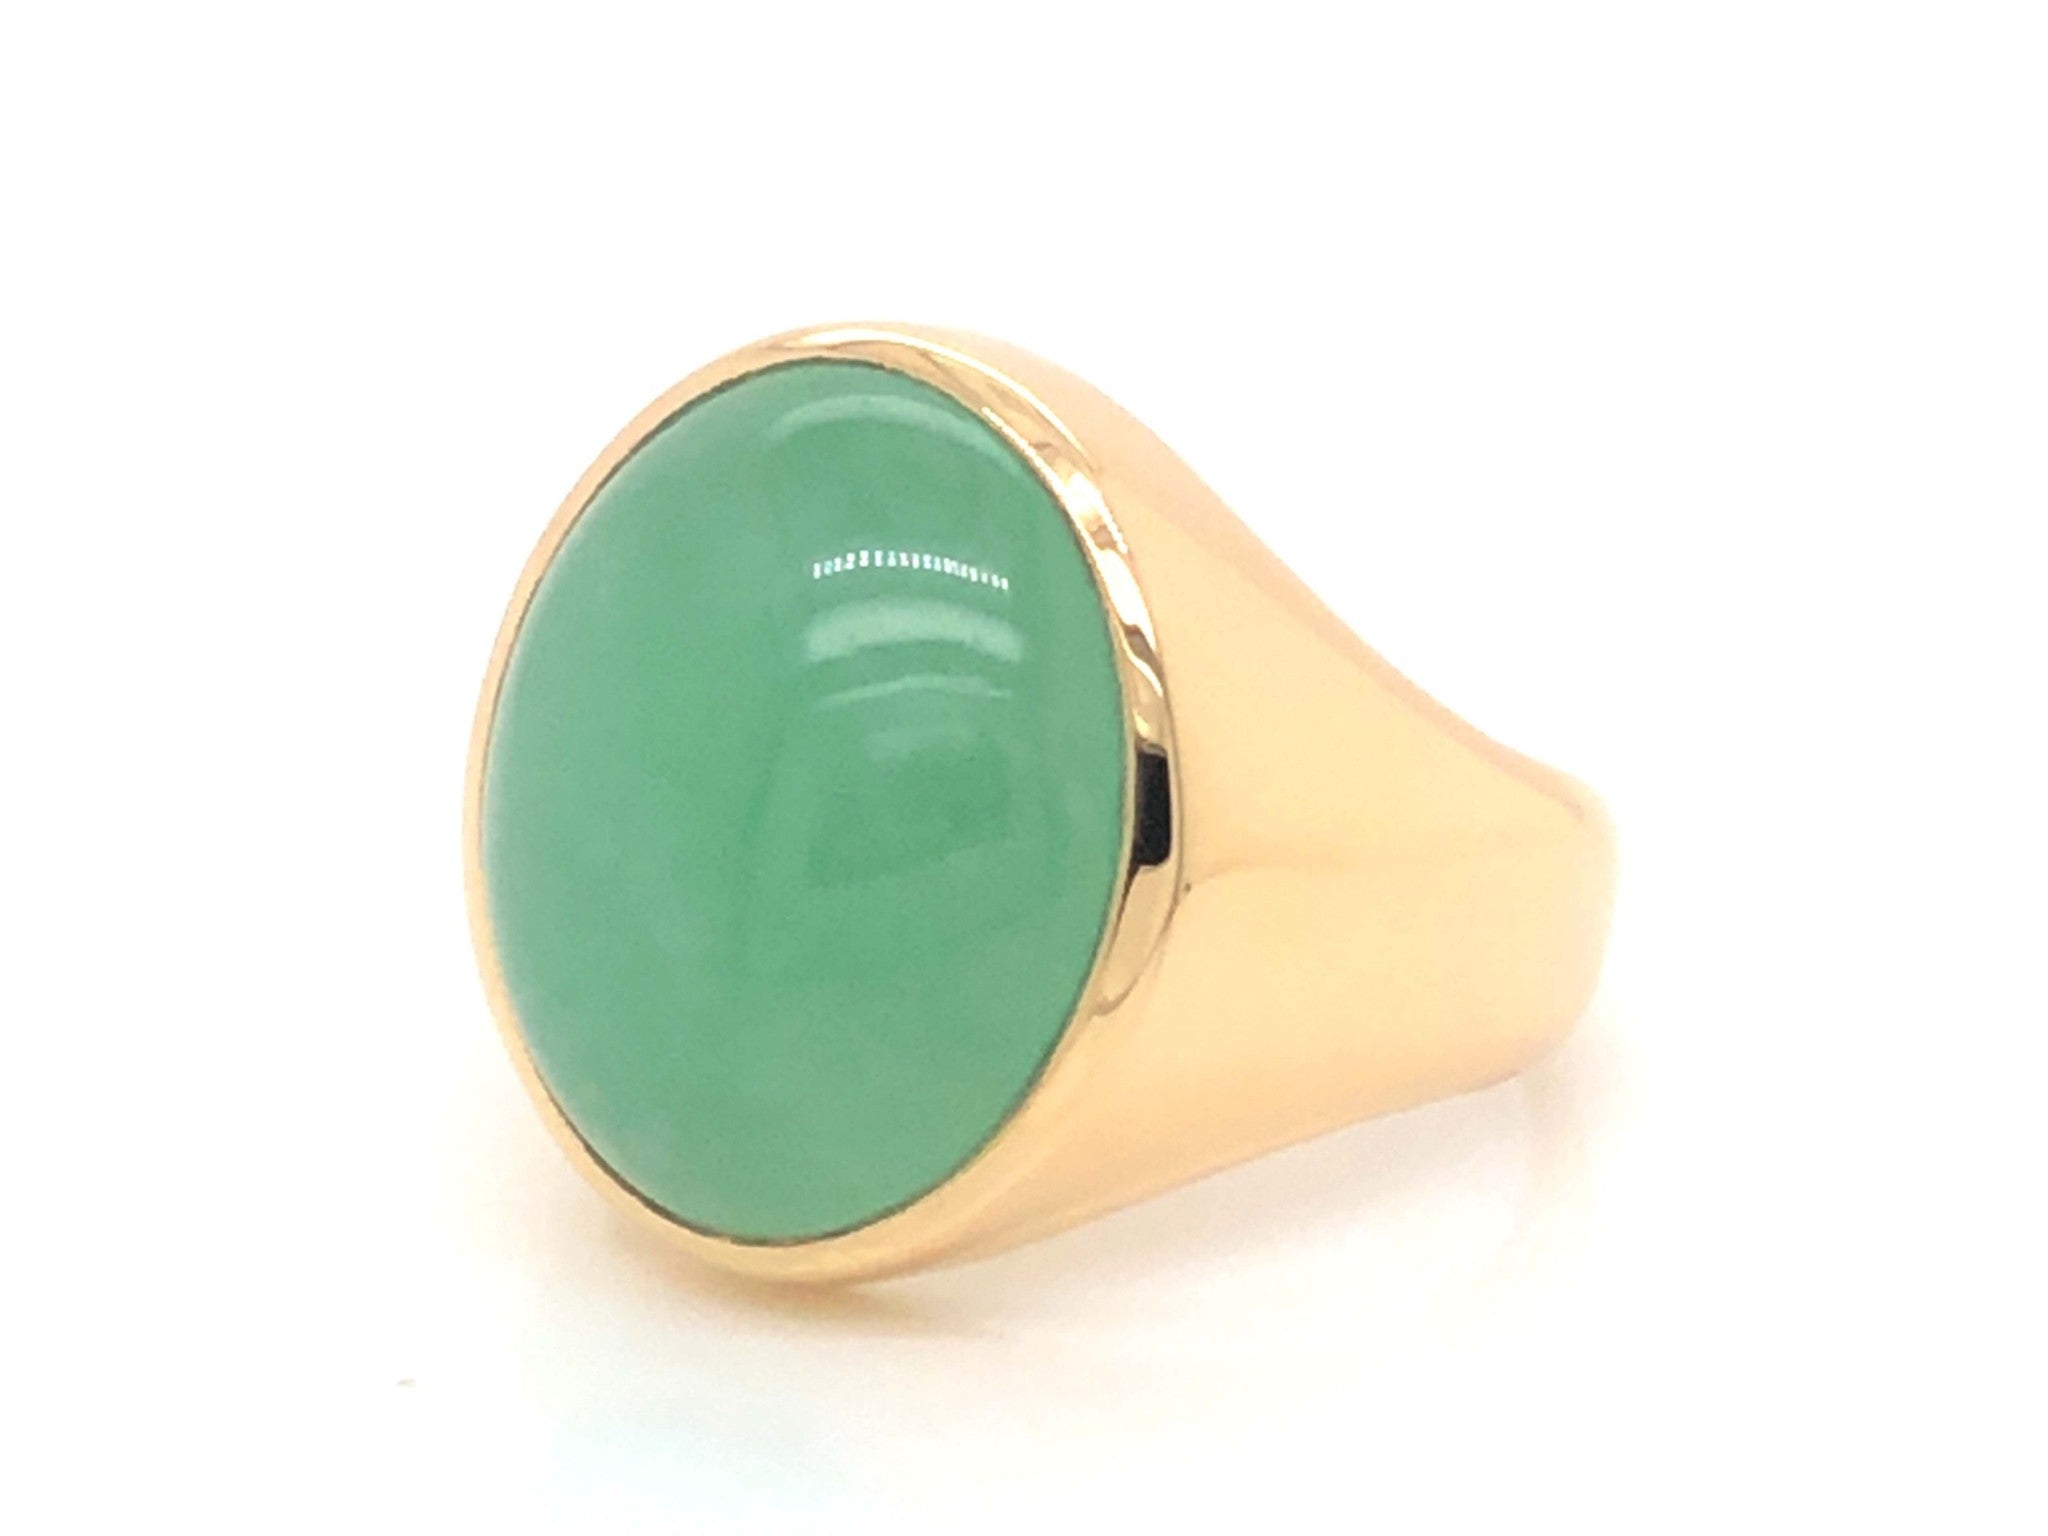 Vintage Oval Translucent Green Jade Pinky Ring in 14k Yellow Gold